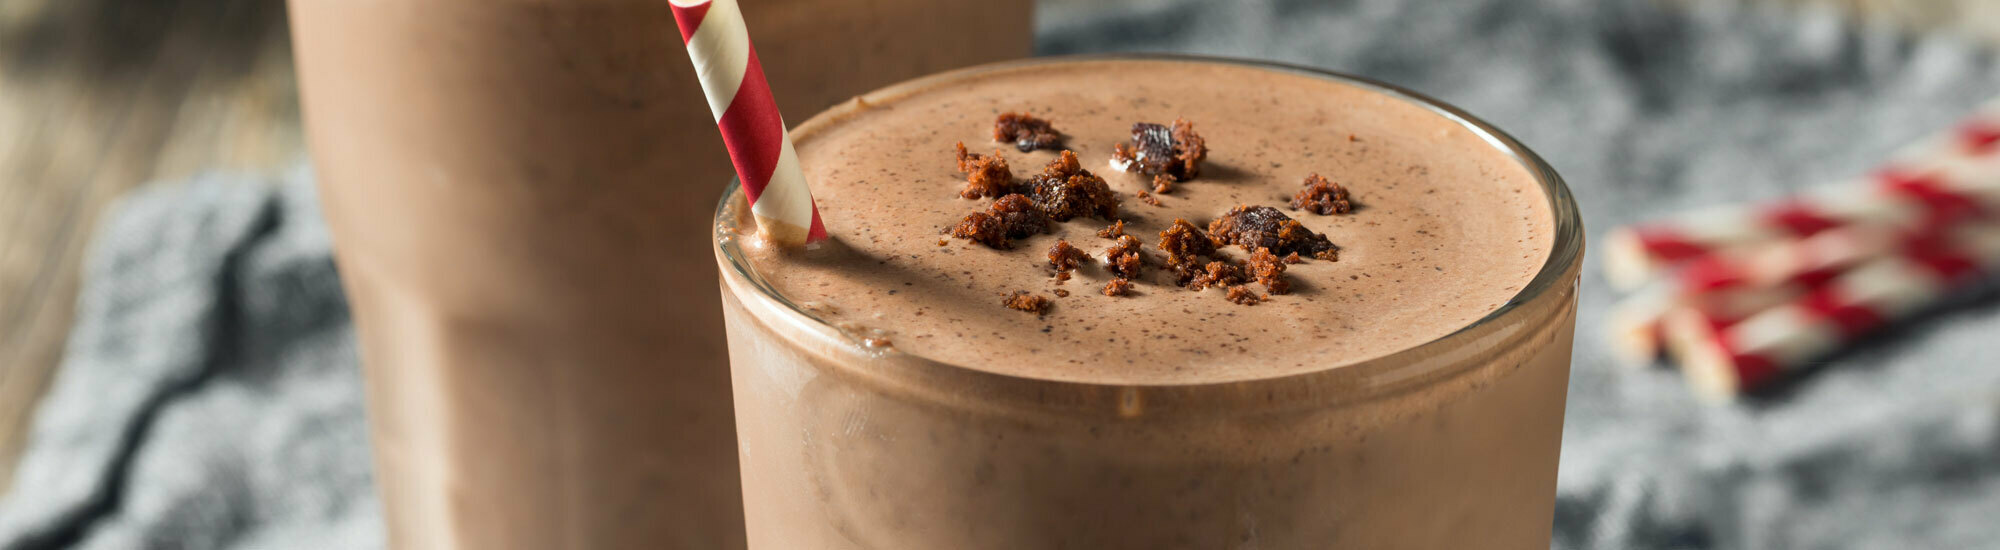 chocolate nutrition drink in a glass